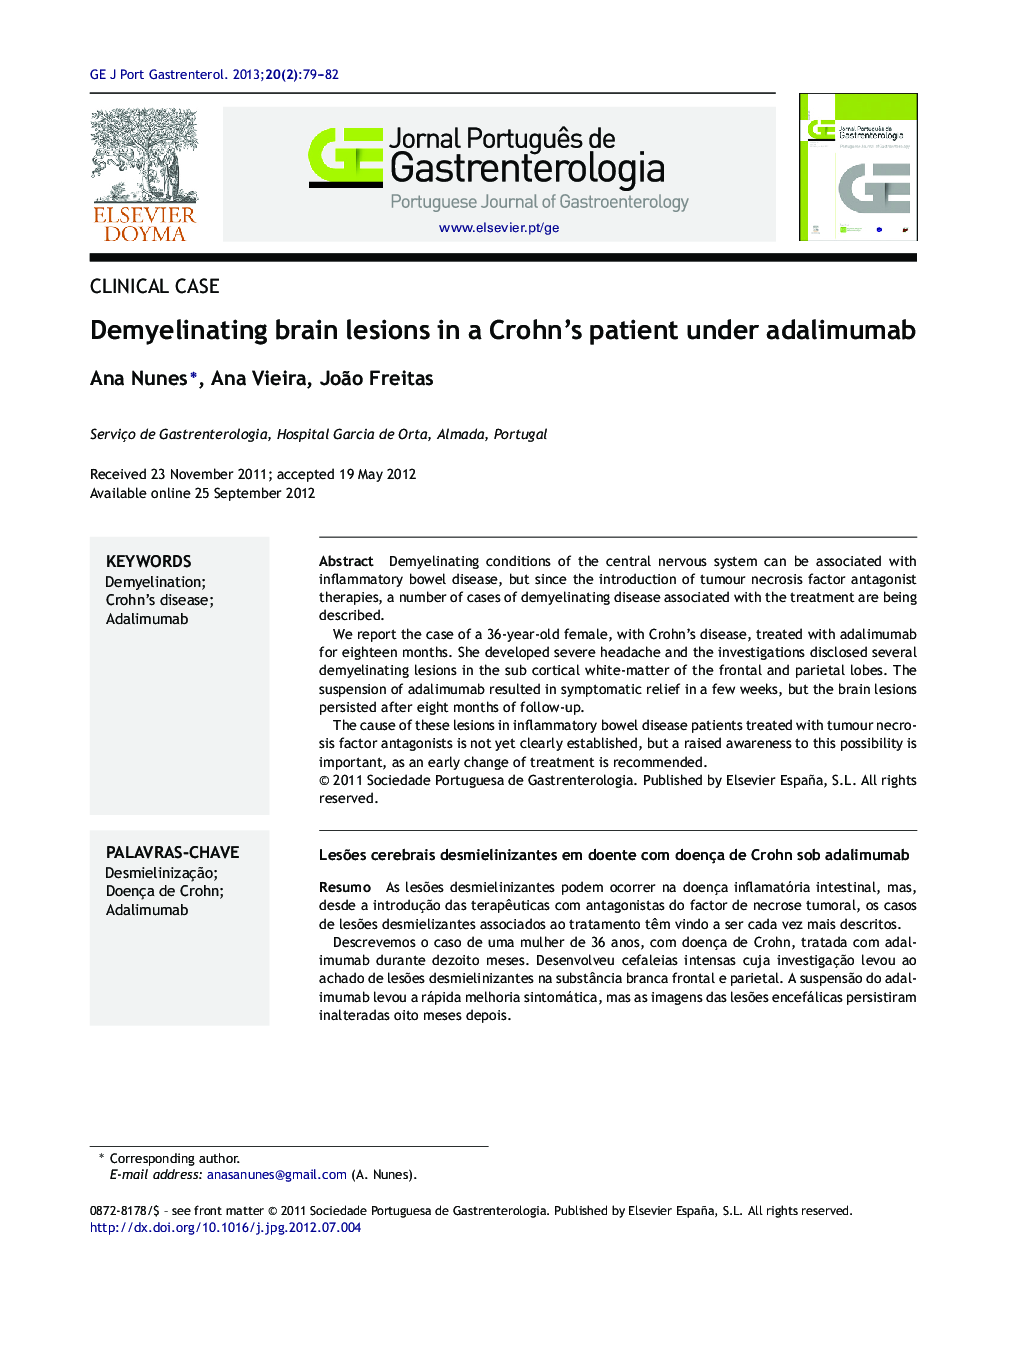 Demyelinating brain lesions in a Crohn's patient under adalimumab